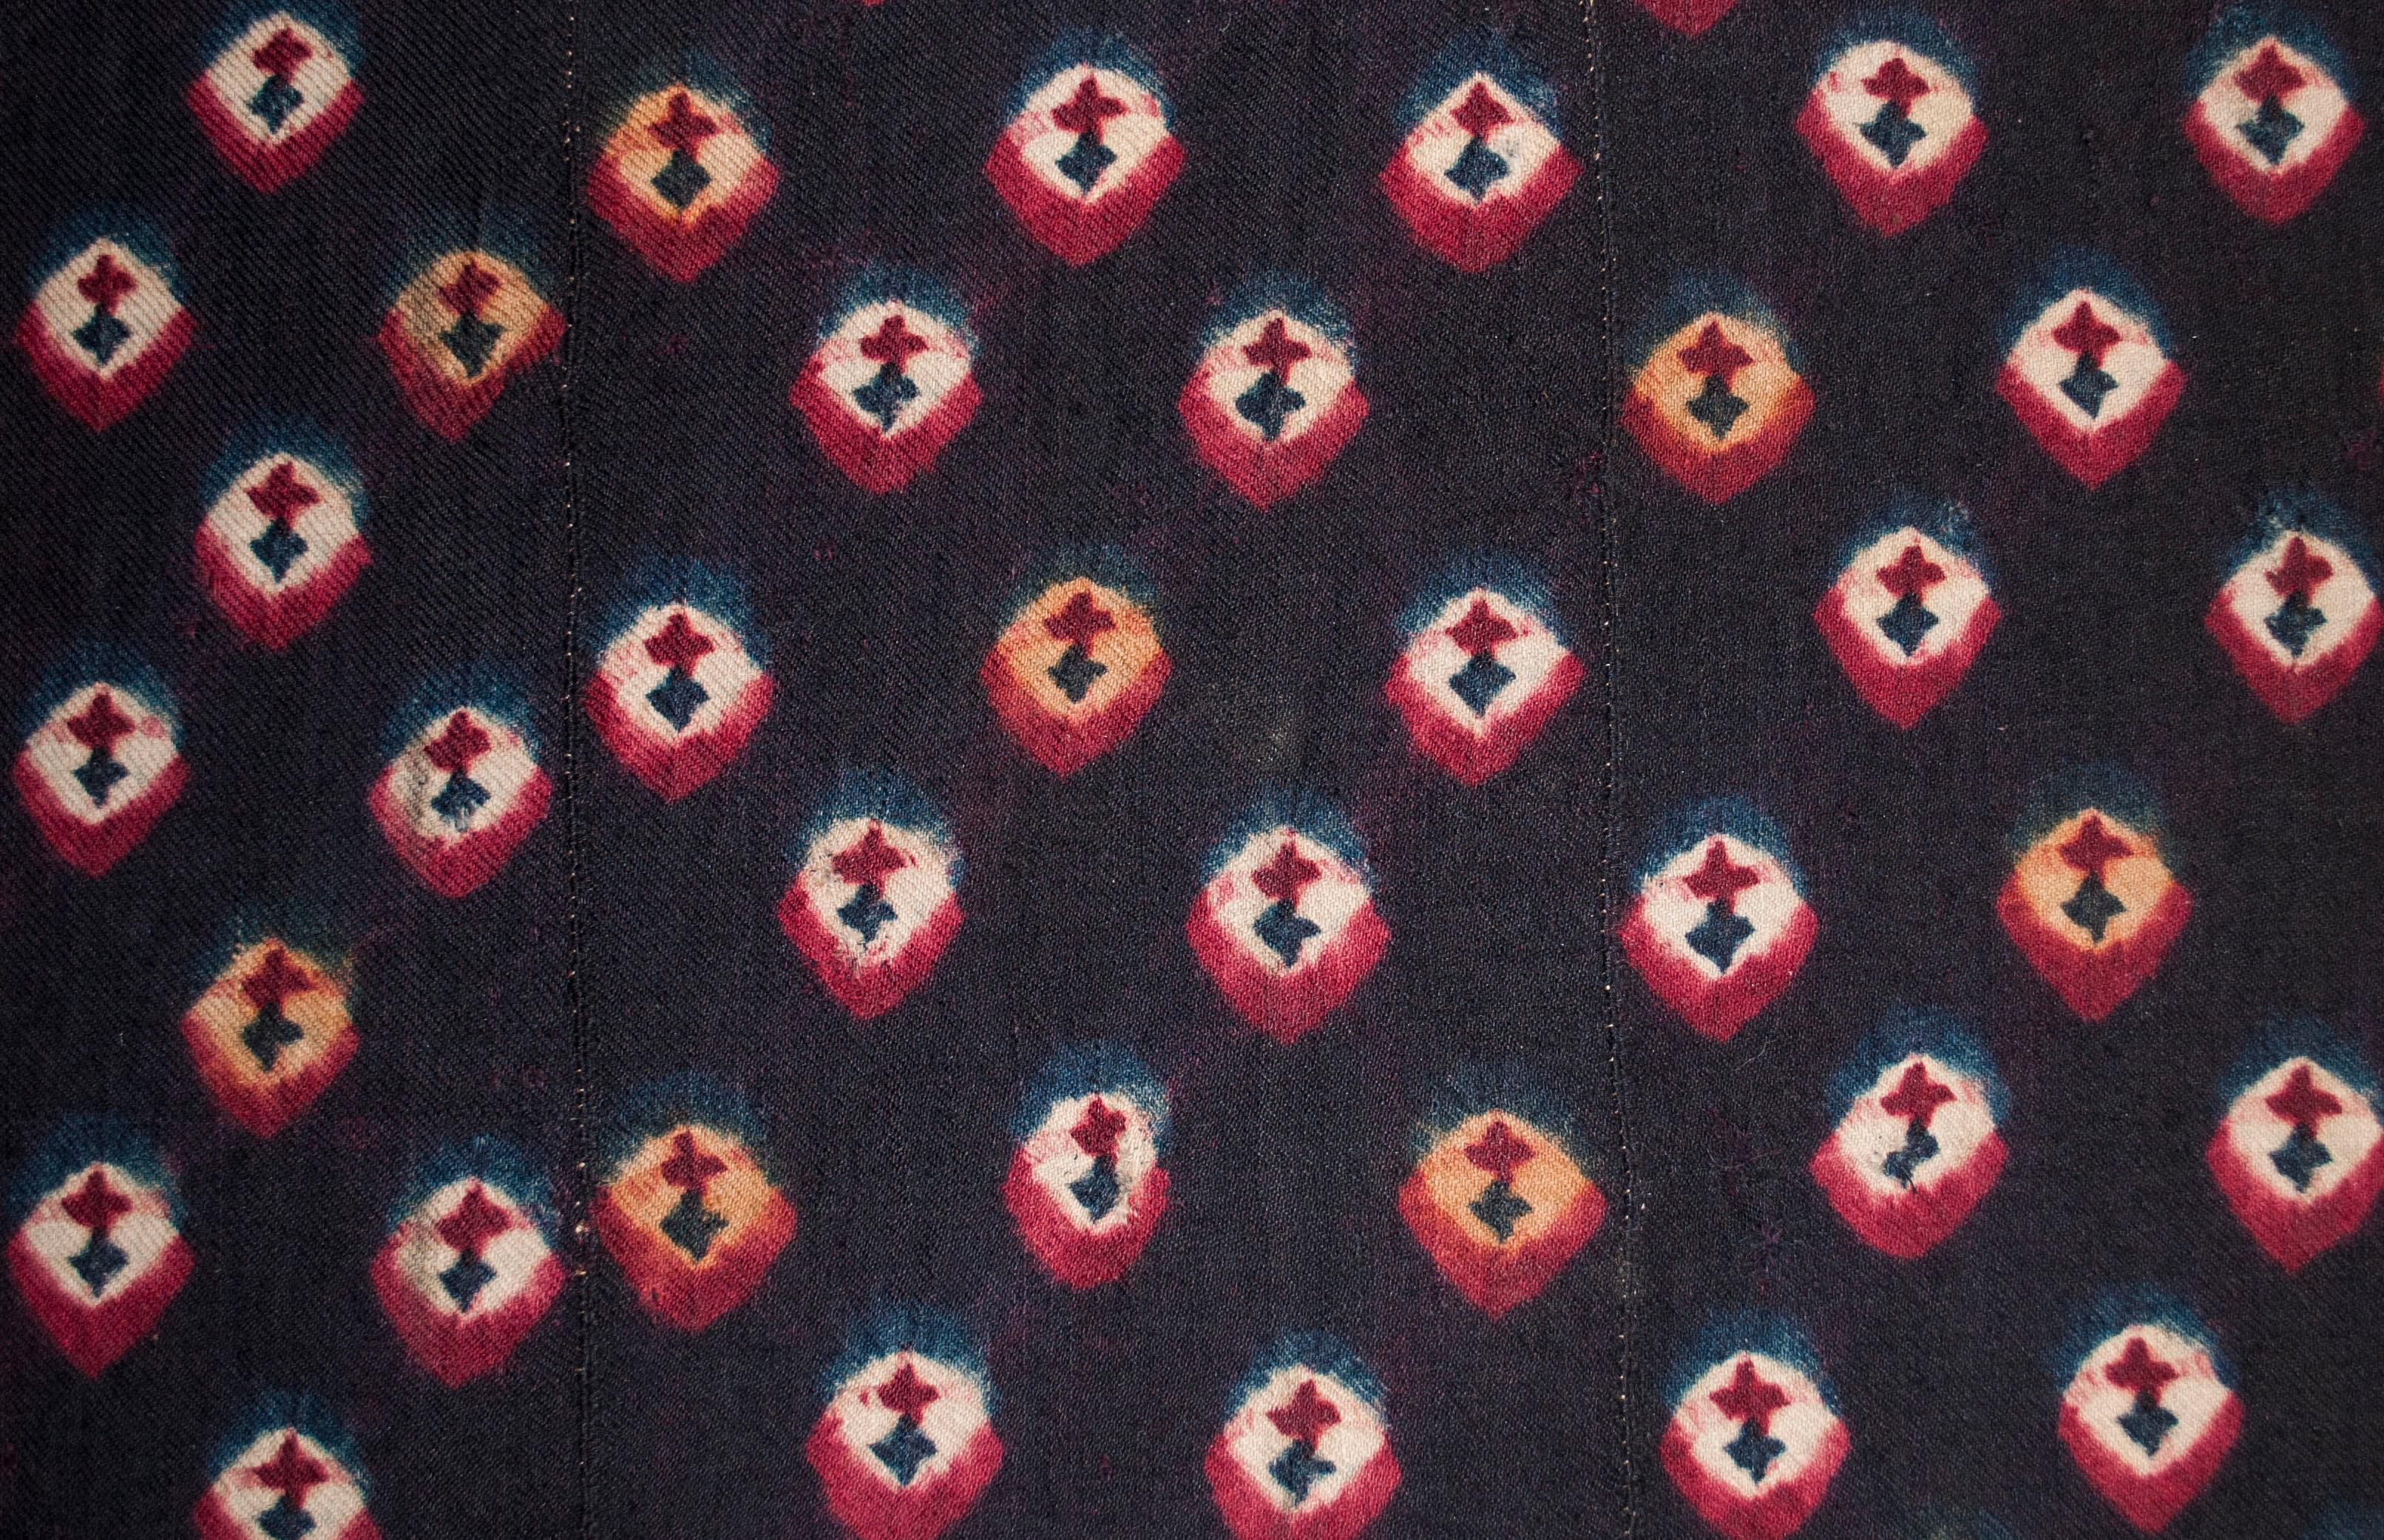 Tie-dyed panel from Tibet, circa 1900.

Woven on a back-strap loom by nomadic Tibetans, this type of tie-dyed wool was traditional used for horse blankets, sitting mats, or trimming on saddle rugs and sleeping carpets. Wool twill weave,